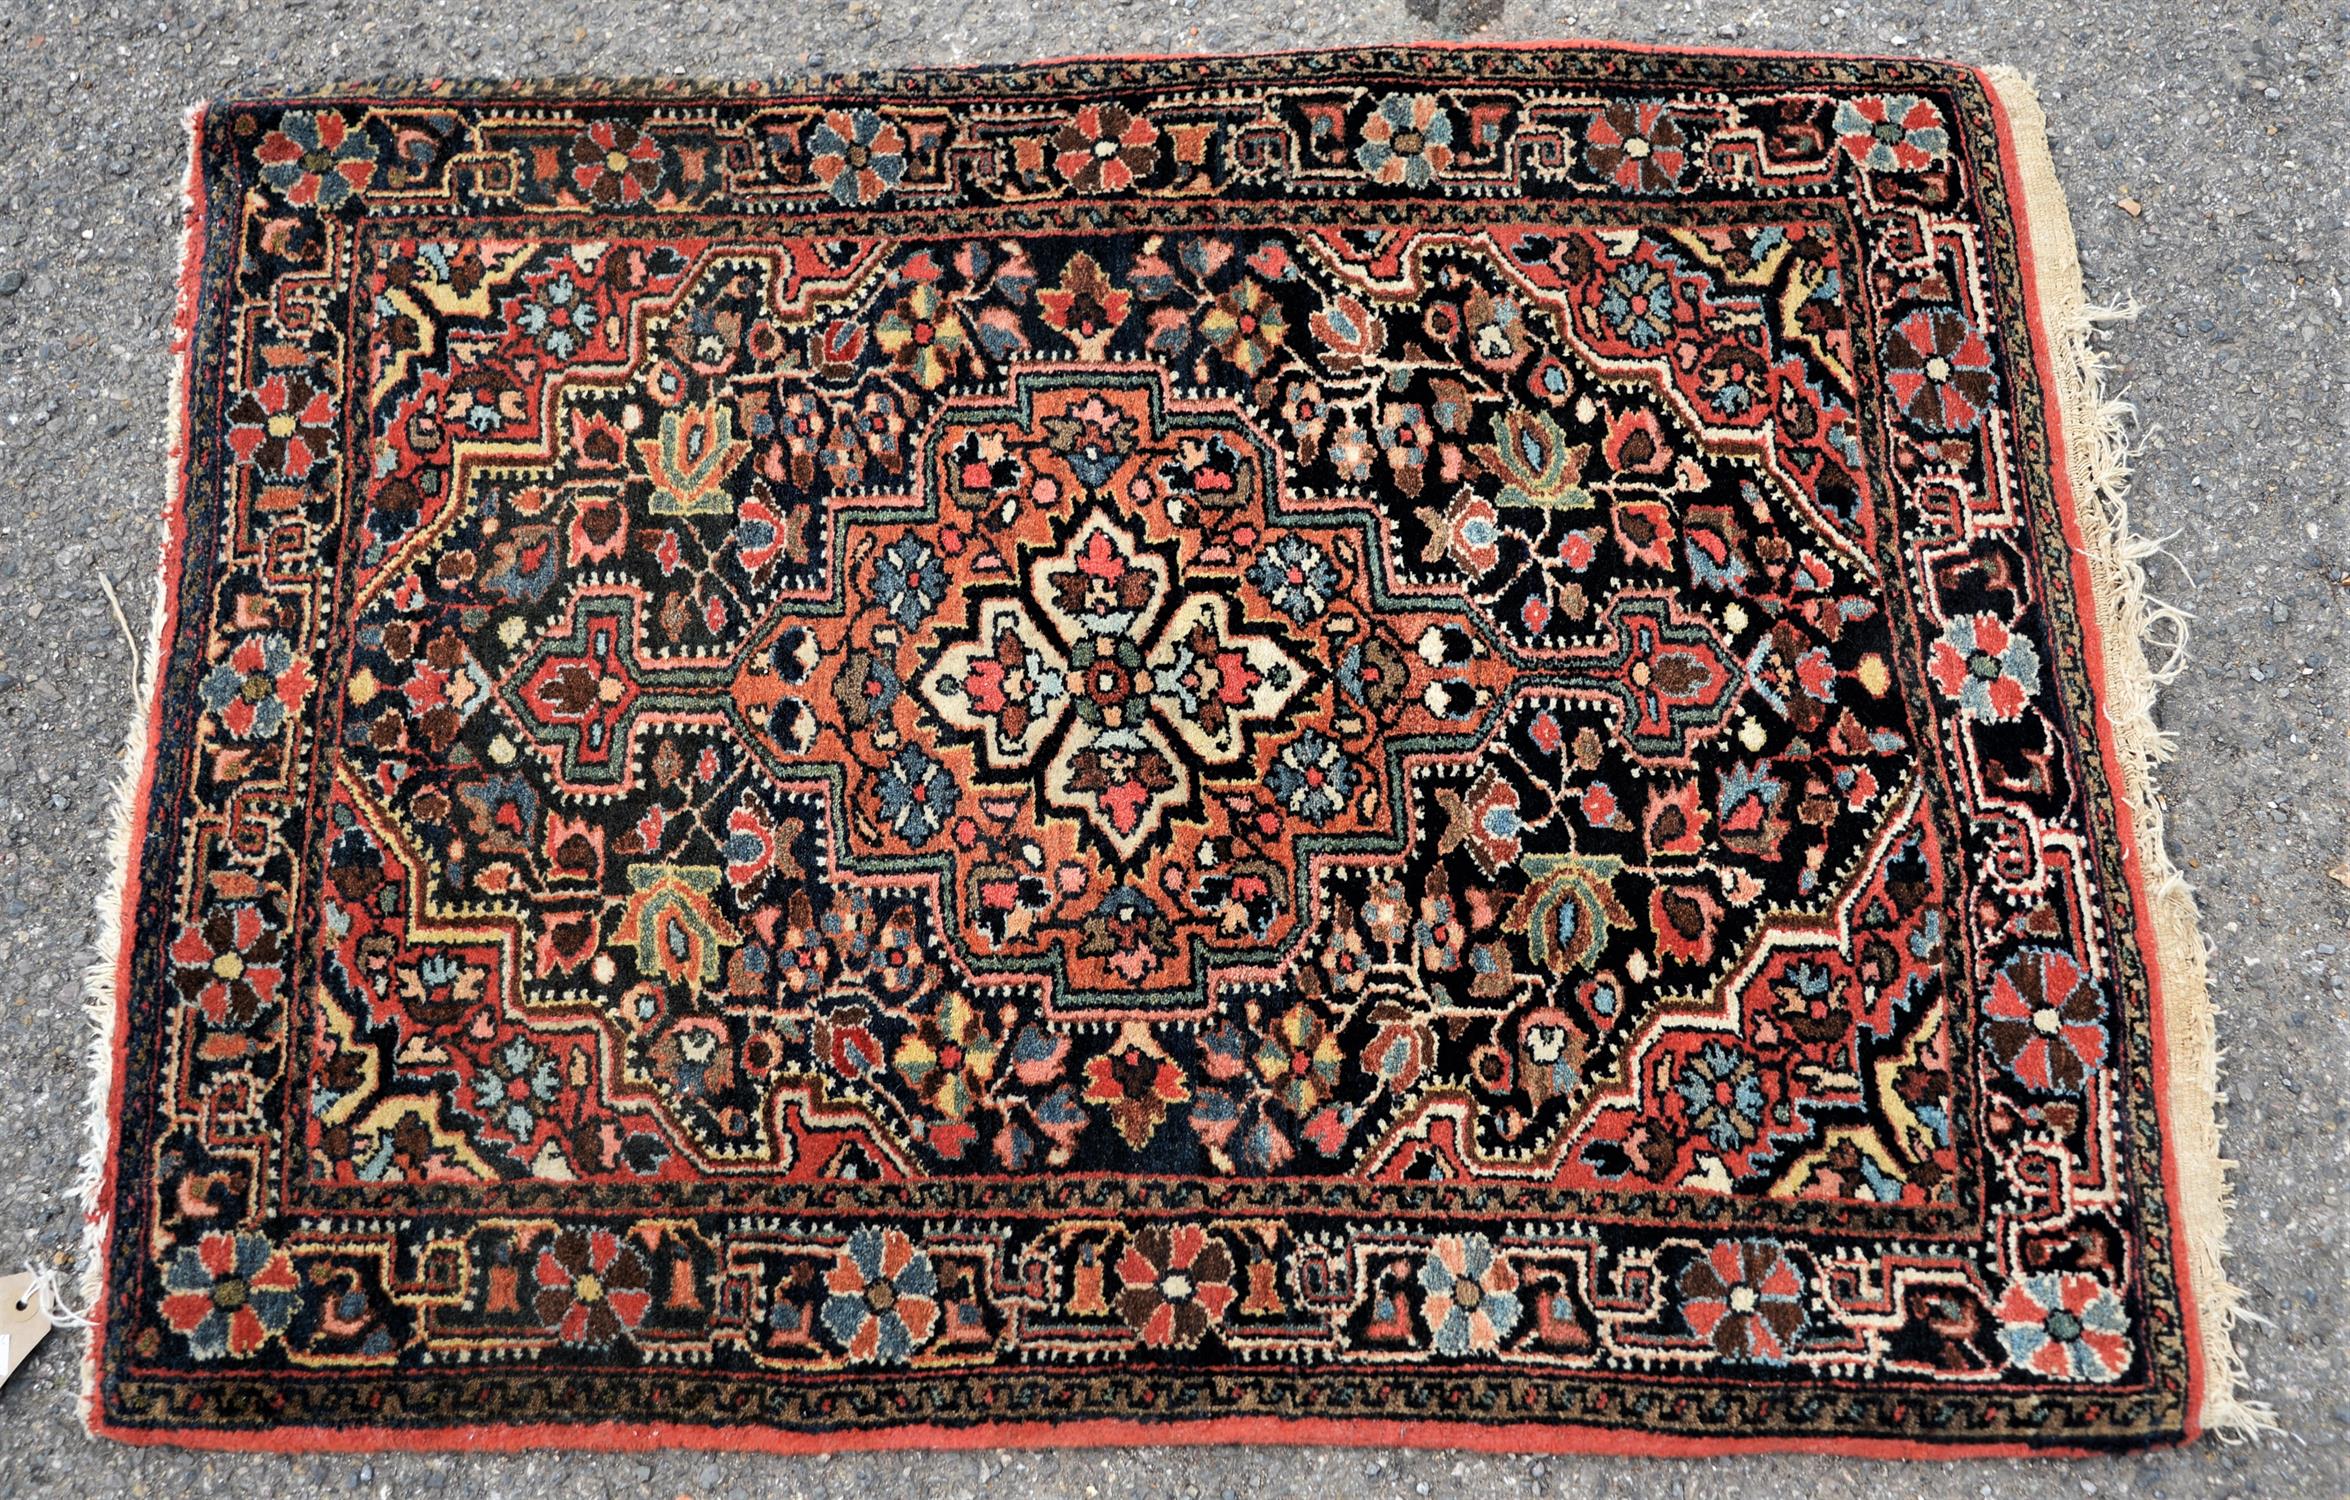 Small Persian mat or rug, 20th Century, central stepped motif, with central floral design,